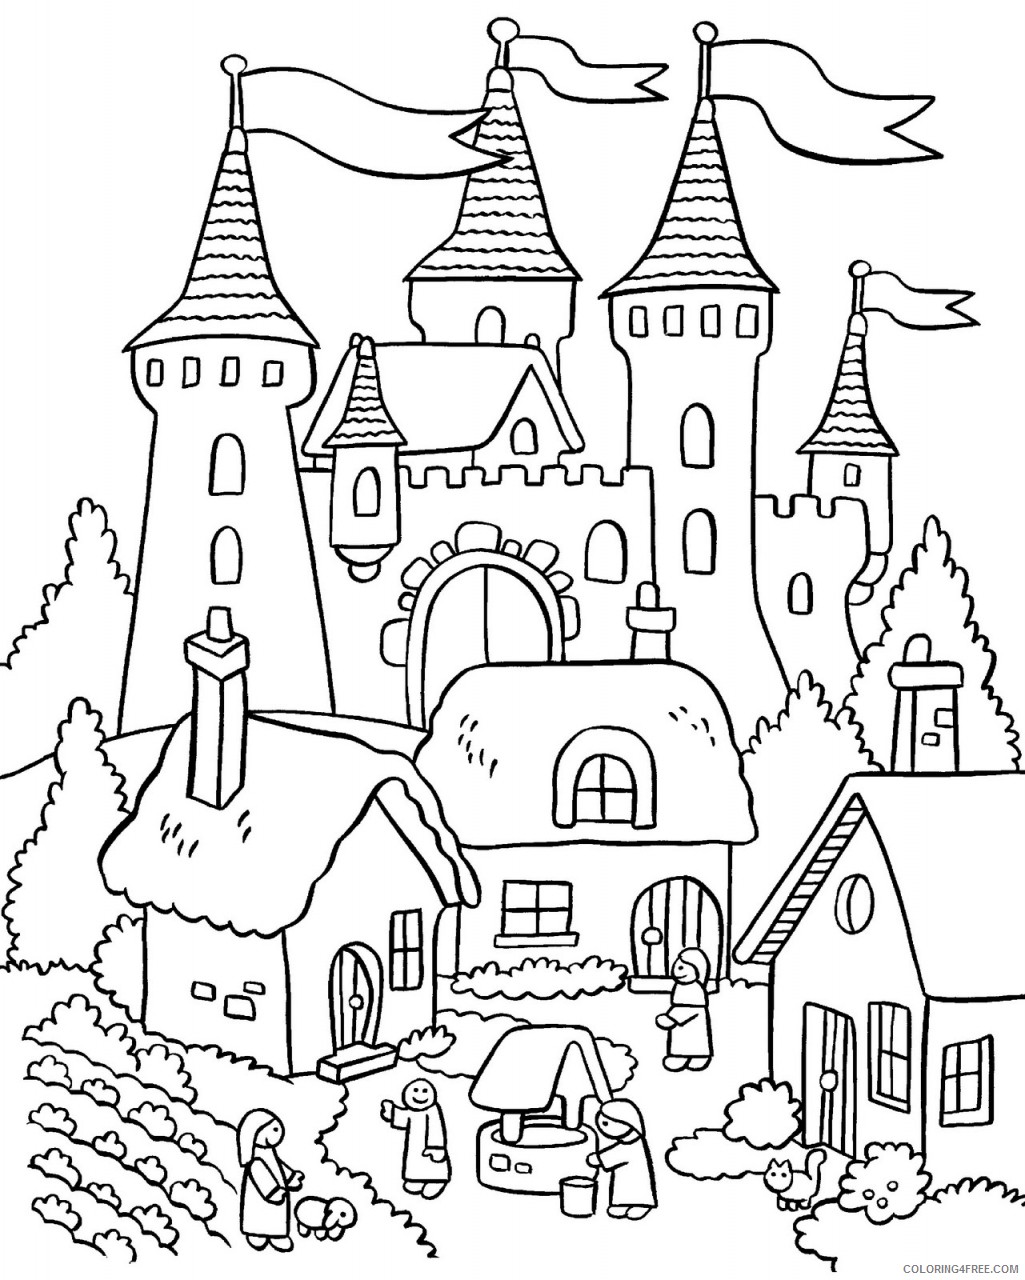 house coloring pages with royal palace Coloring4free